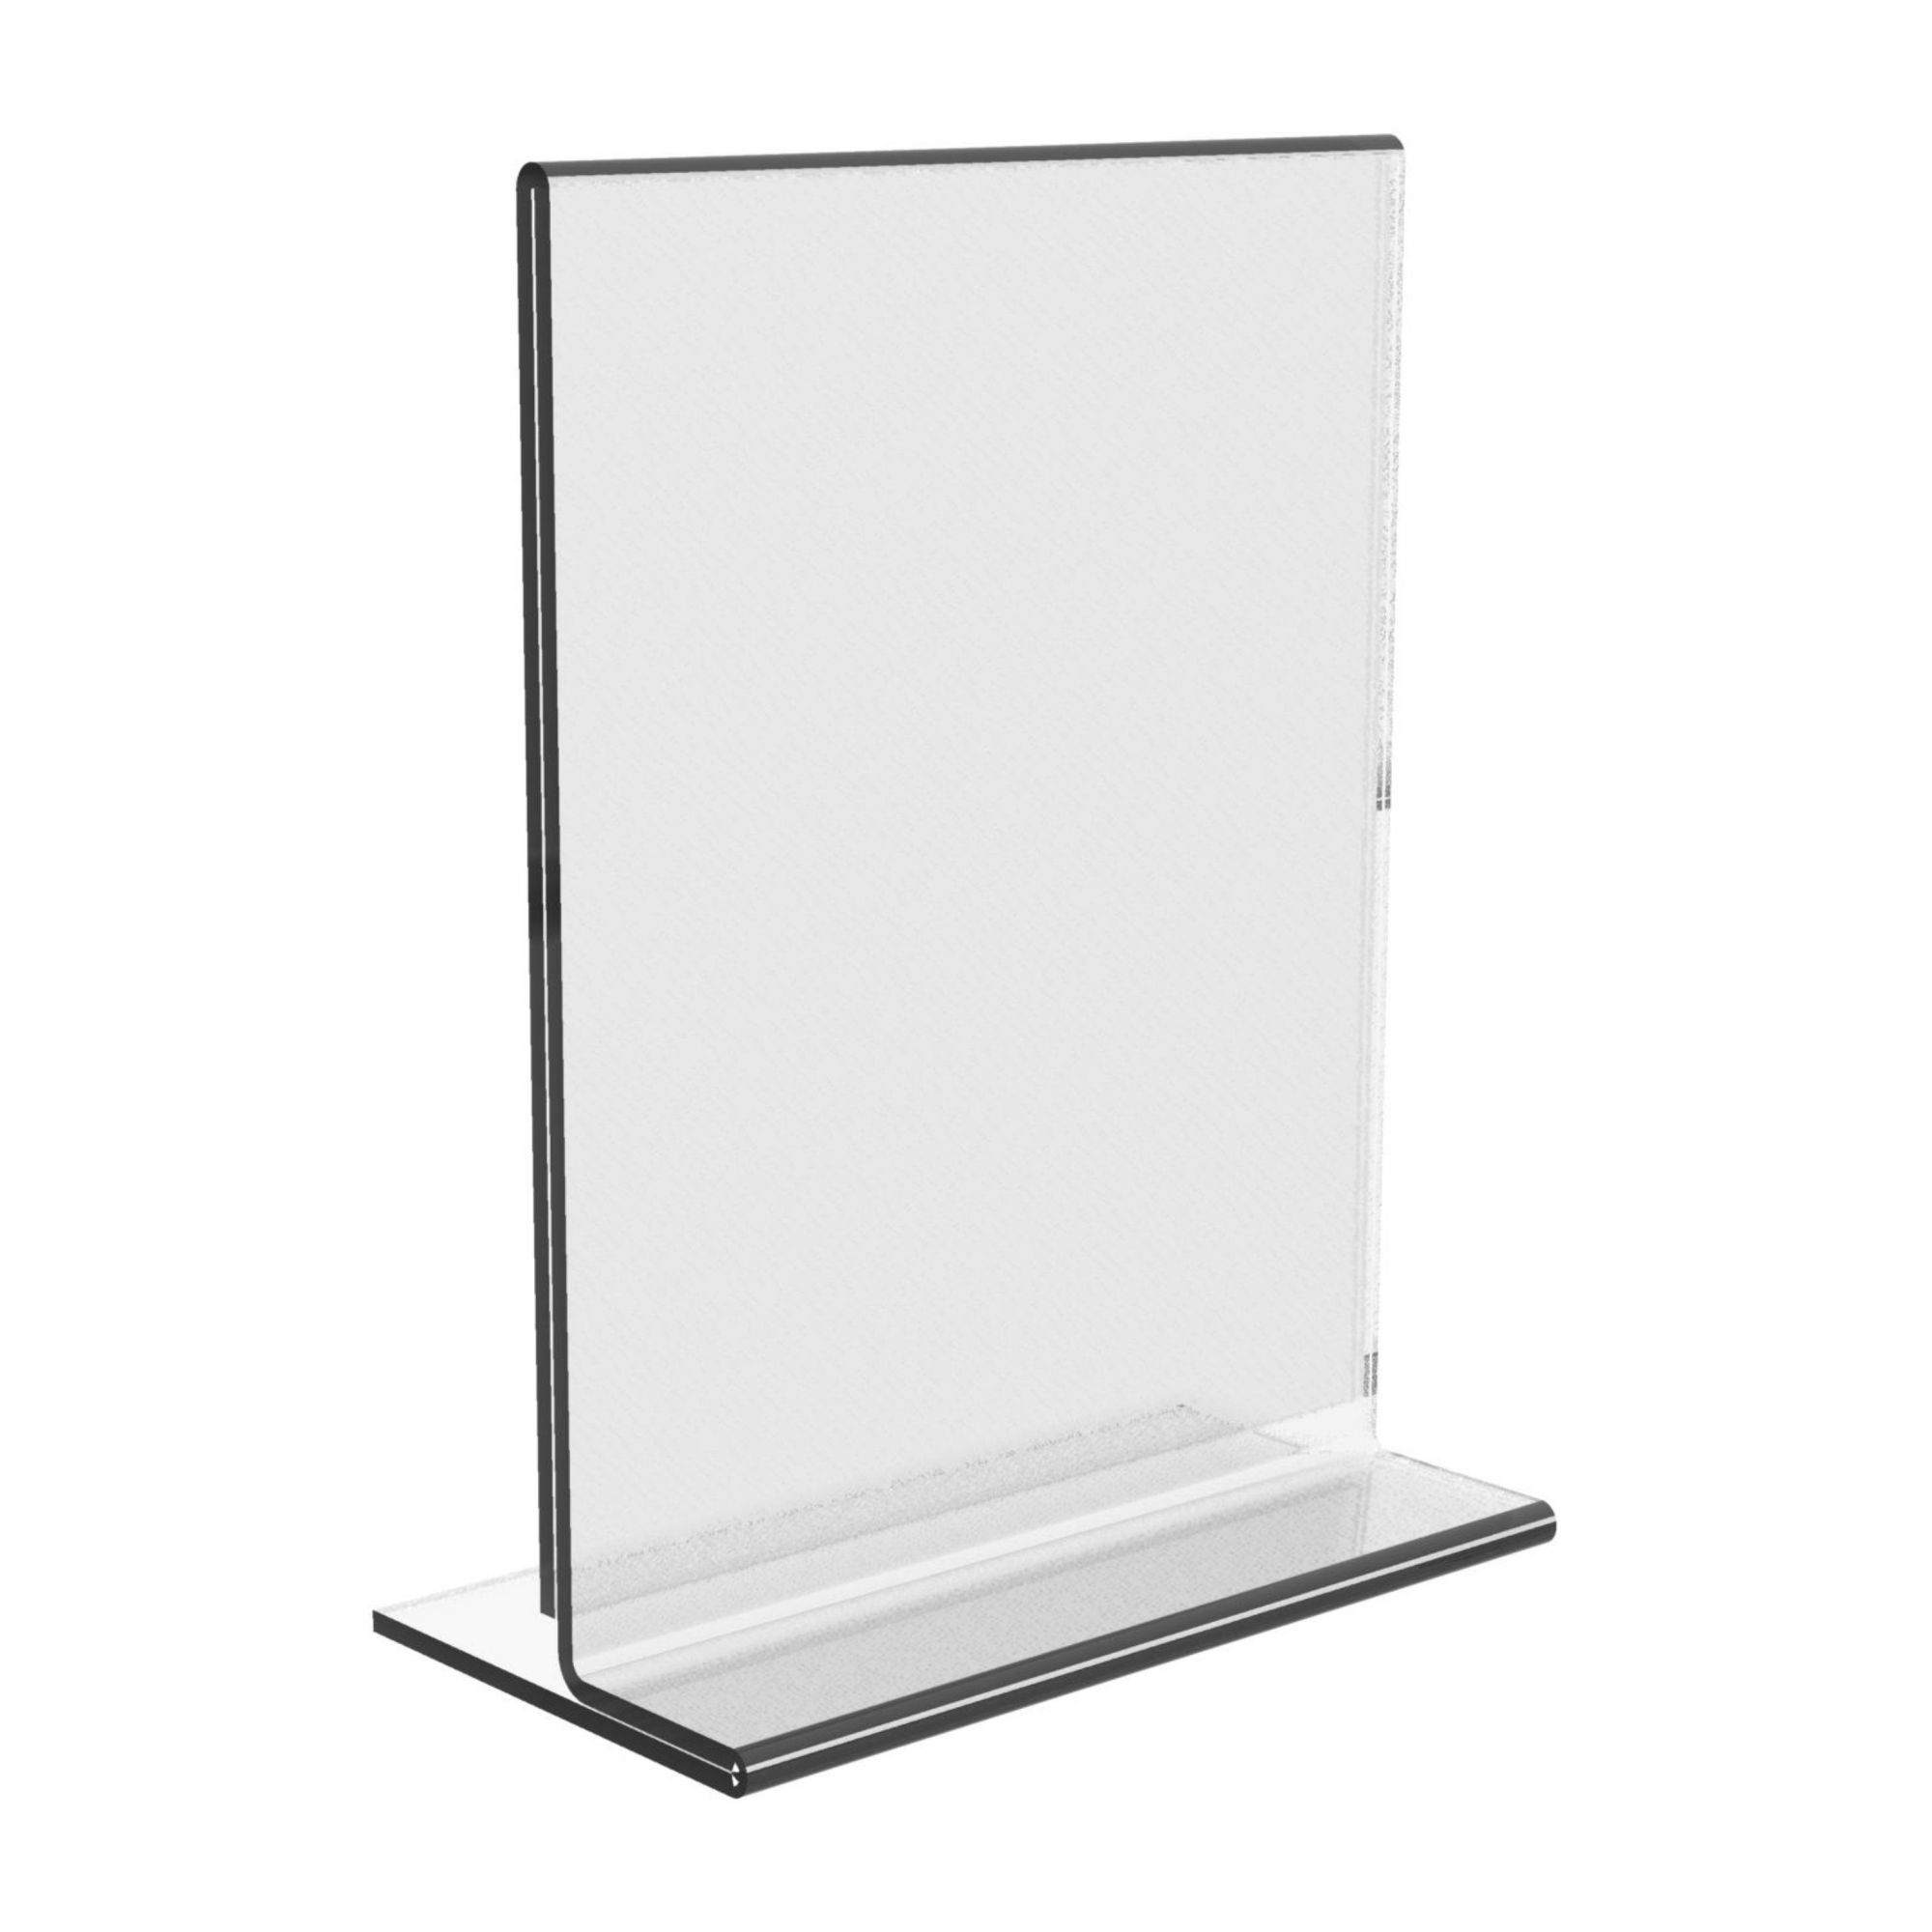 Acrylic Paper Holder - Ores Display Systems